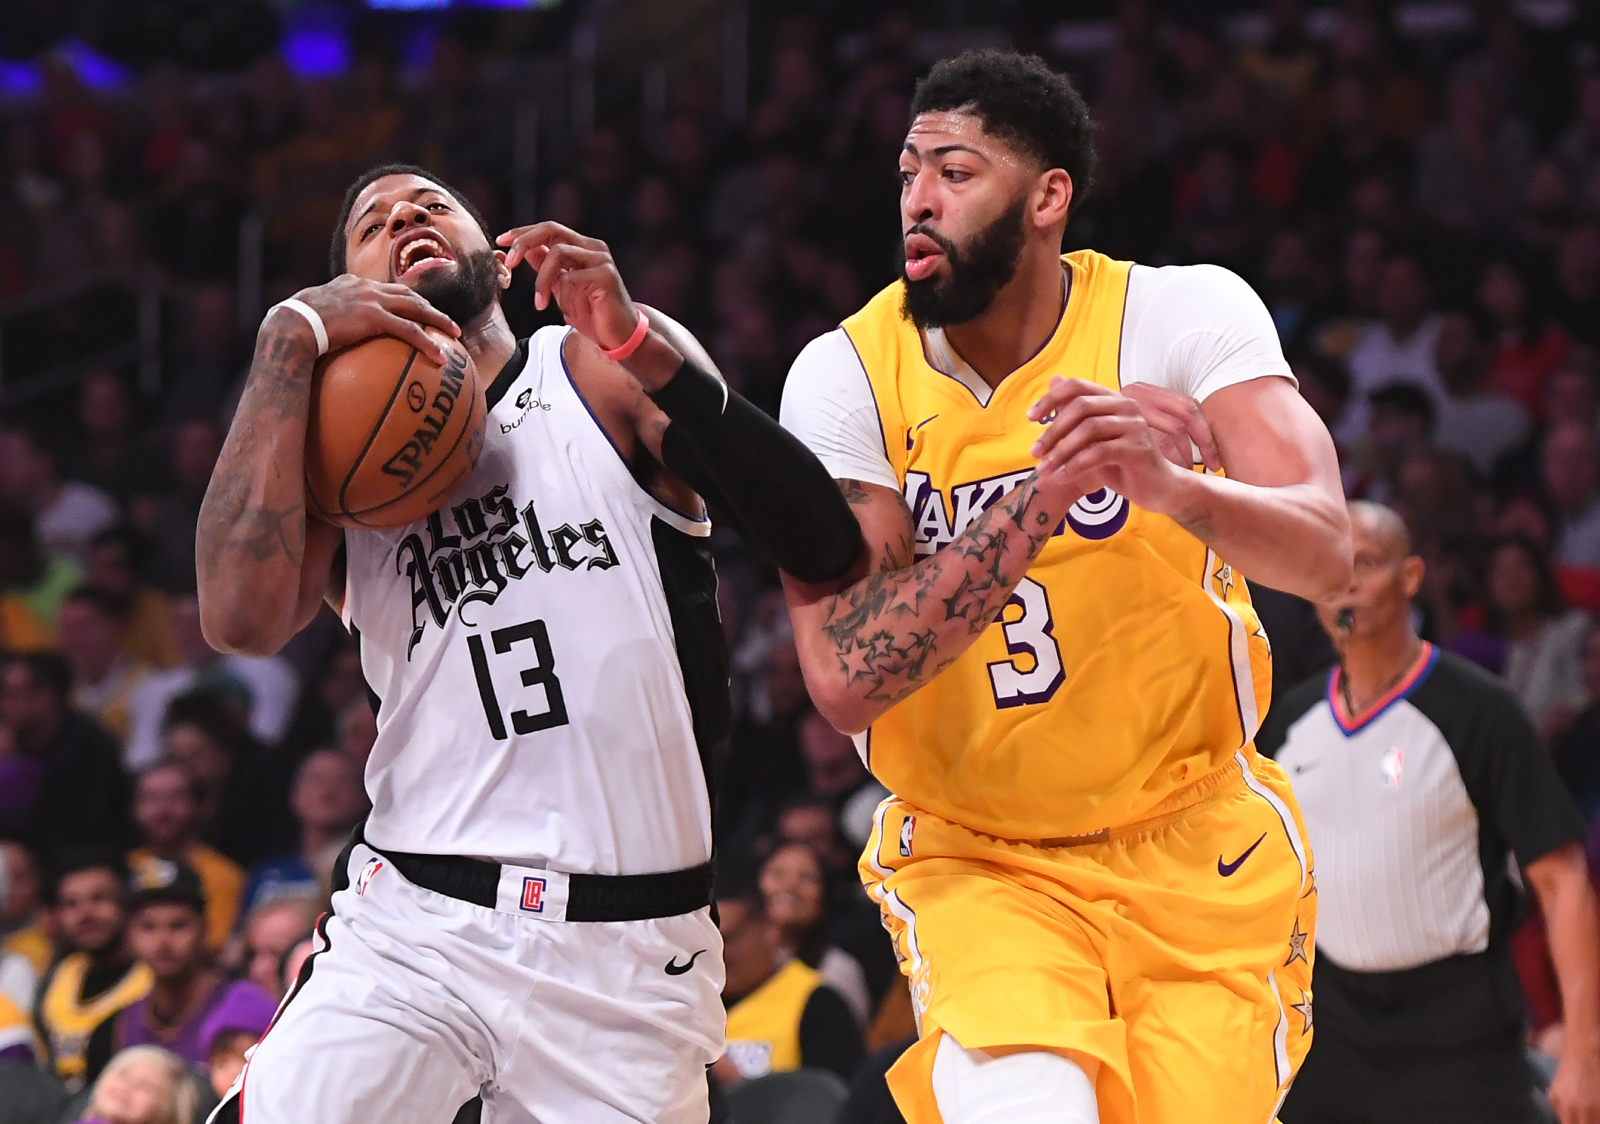 Anthony Davis and Paul George both have chances to win a championship this year for the Lakers and Clippers. Who has a higher net worth?